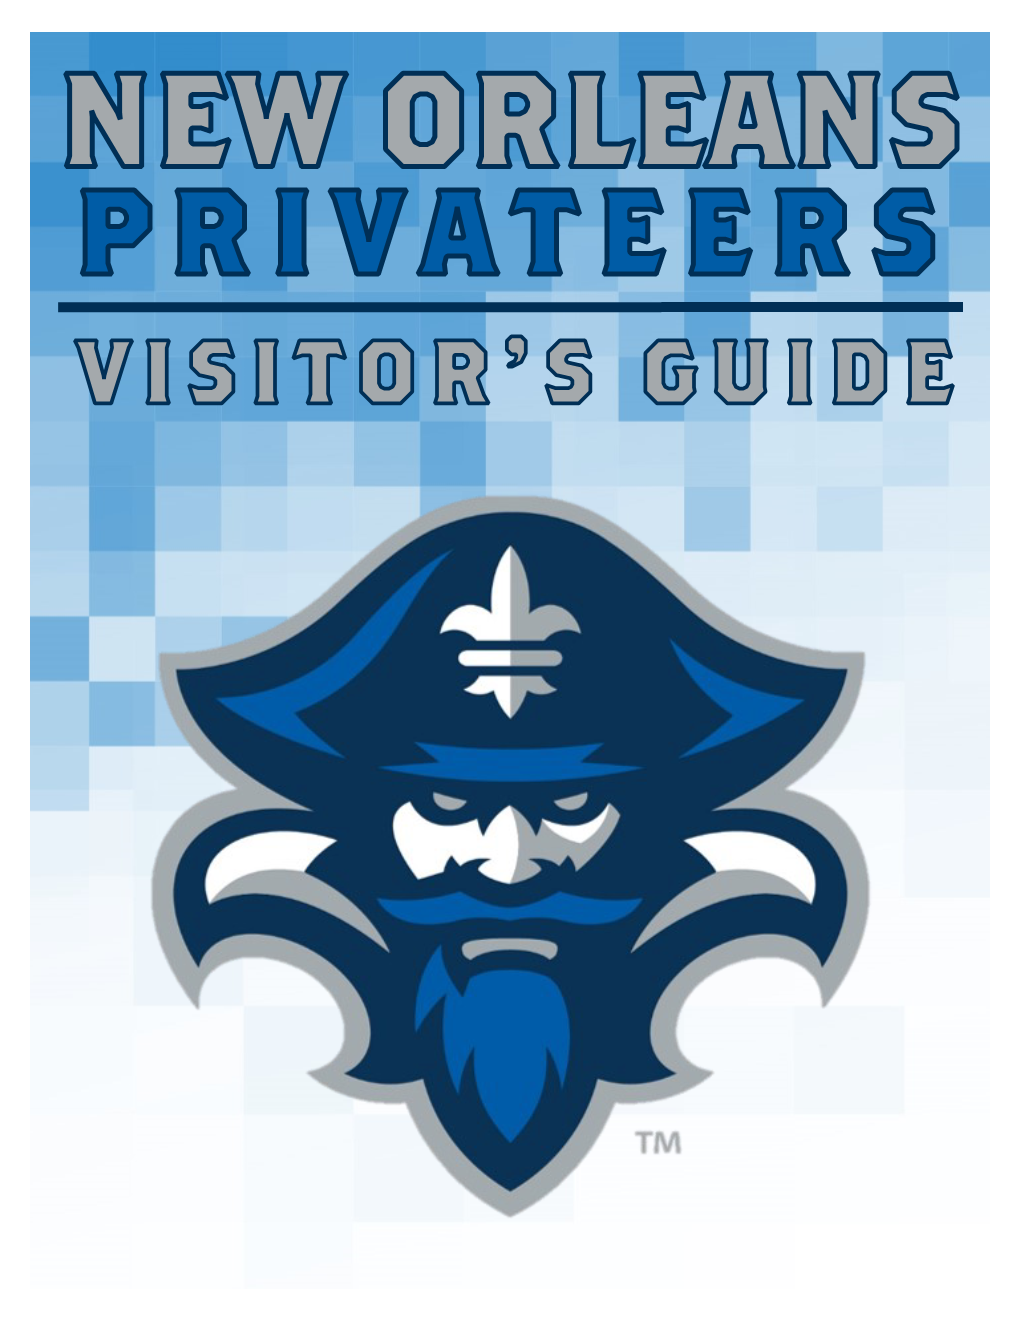 The University of New Orleans Privateer Quick Facts